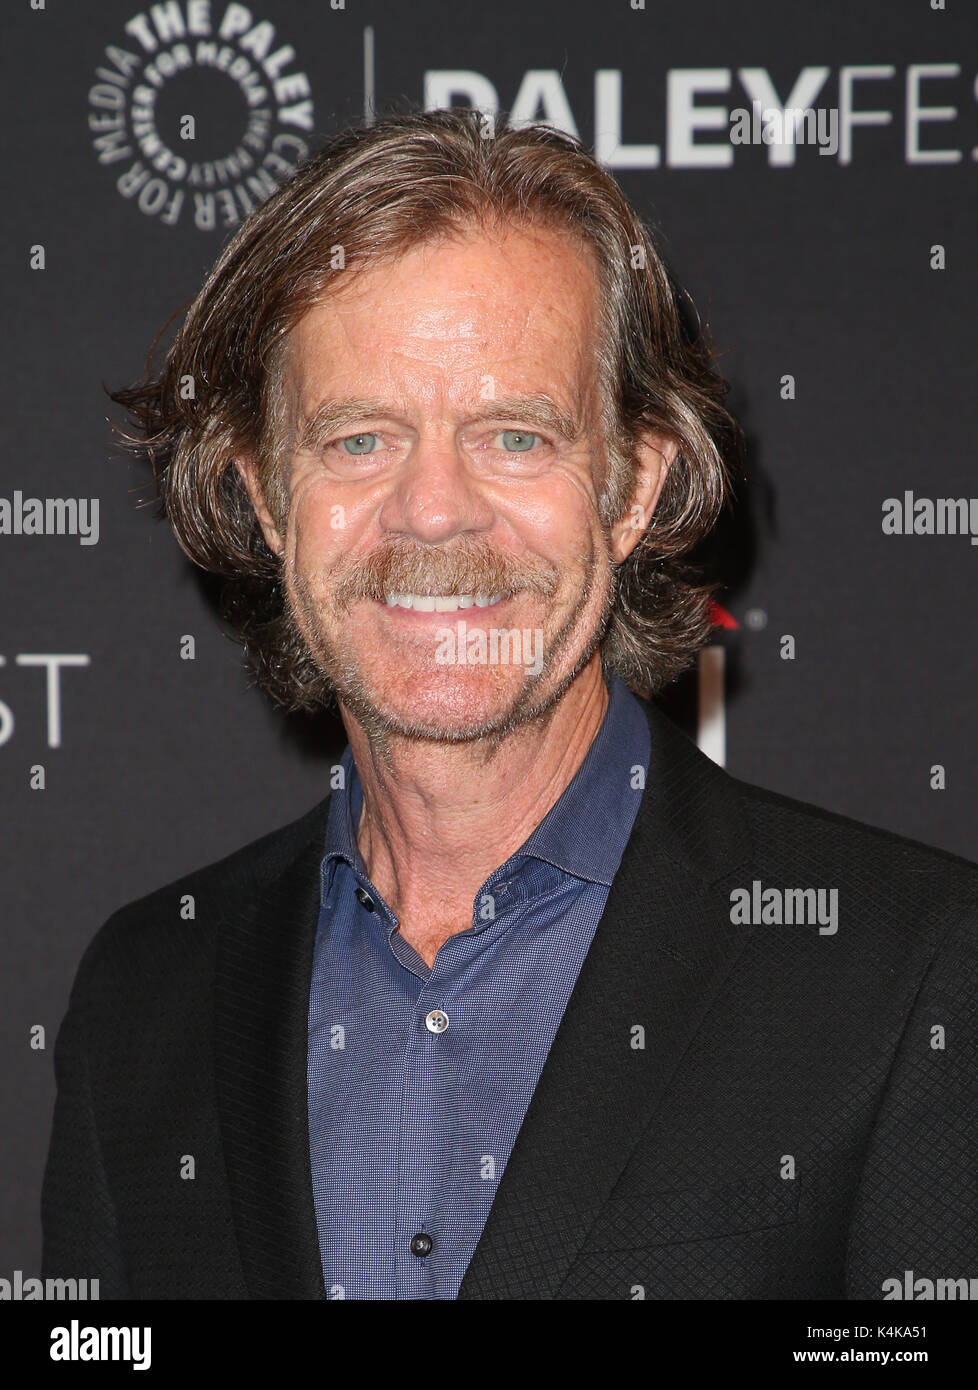 Beverly Hills, Ca. 6th Sep, 2017. William H. Macy, At SHAMELESS SCREENING & PANEL DURING THE 11TH ANNUAL PALEYFEST FALL TV PREVIEWS At The Paley Center for Media In California on September 6, 2017. Credit: Faye S/Media Punch/Alamy Live News Stock Photo